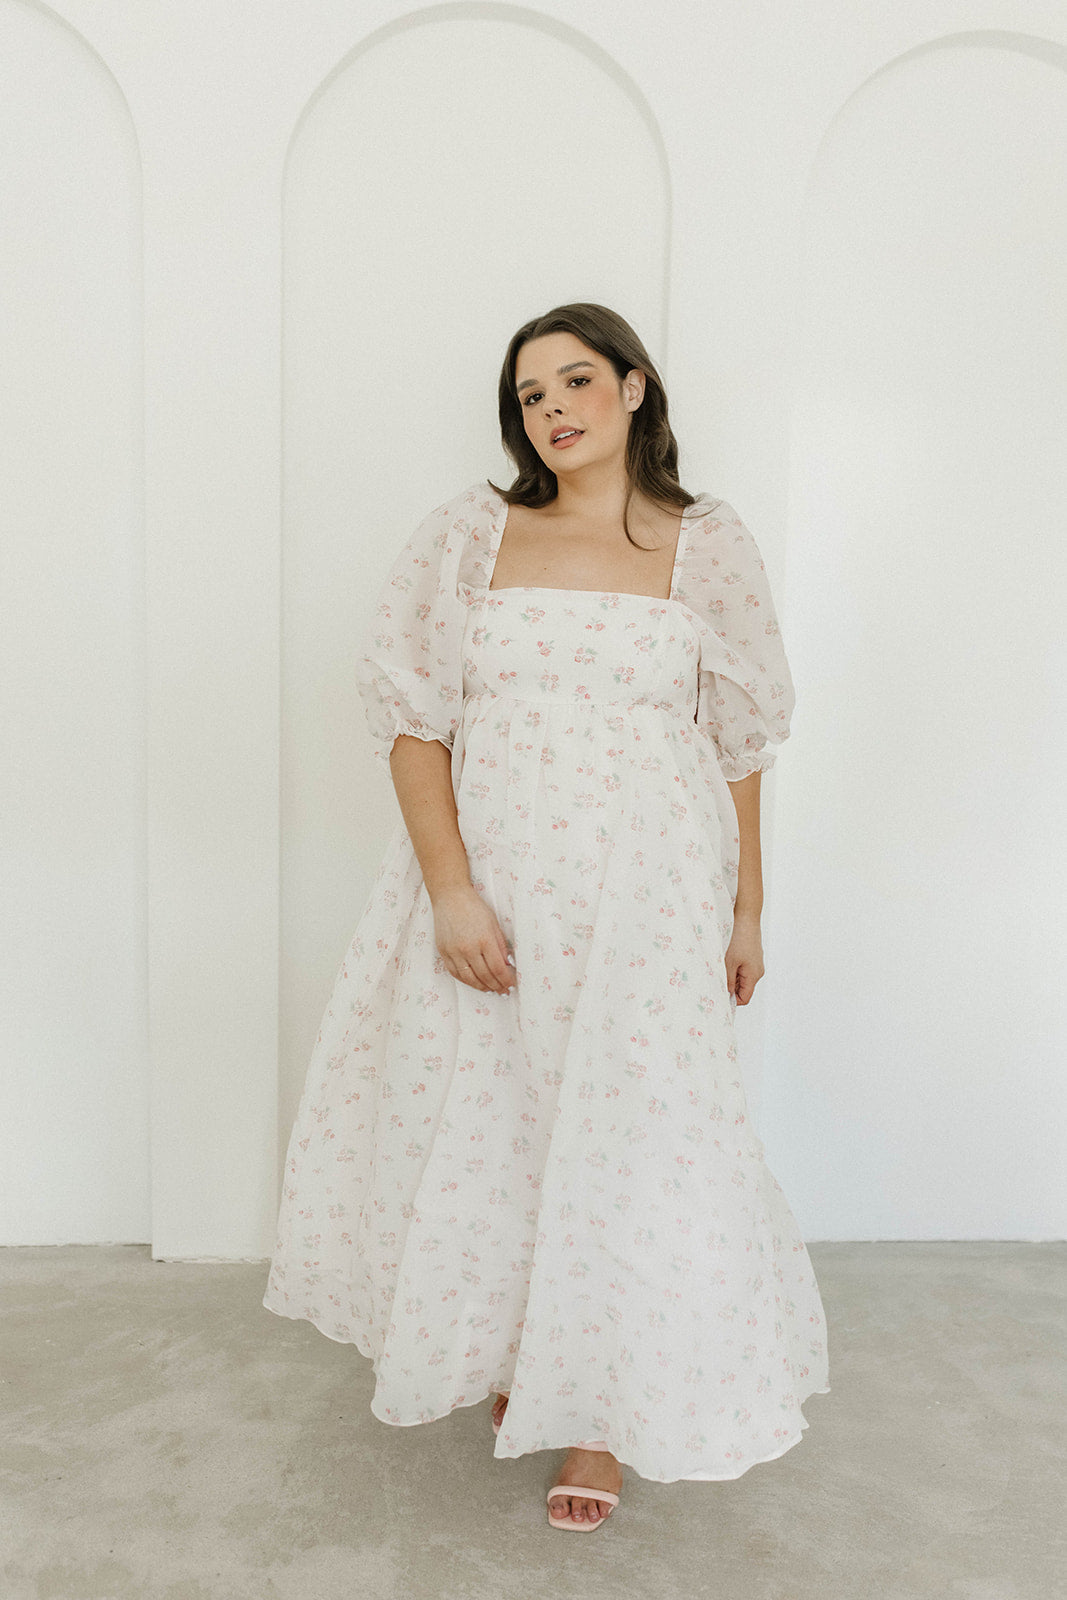 *New* Mona Maxi Dress with Smocking in Blush Floral - Bump Friendly & Inclusive Sizing (S-3XL)